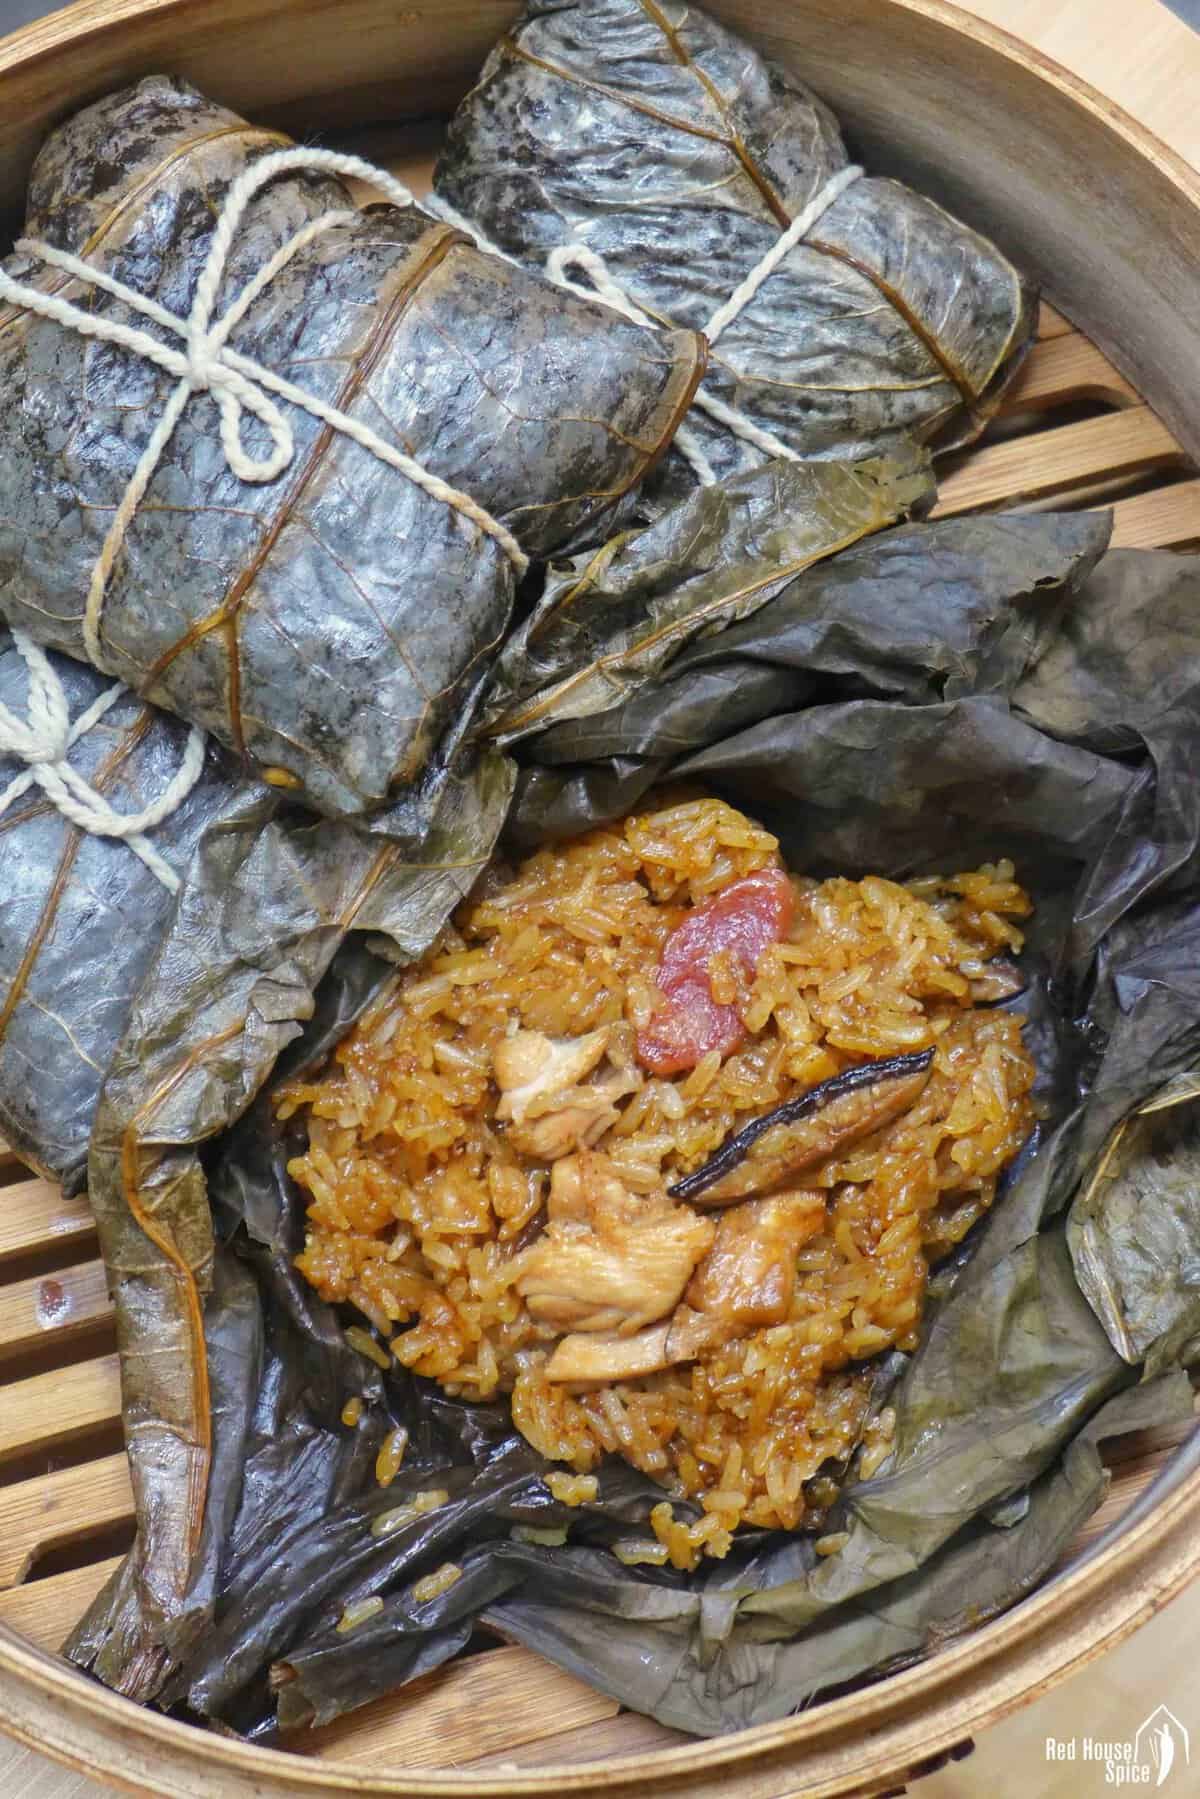 Glutinous Rice and Chinese Sausage Wrapped in Banana Leaves Recipe